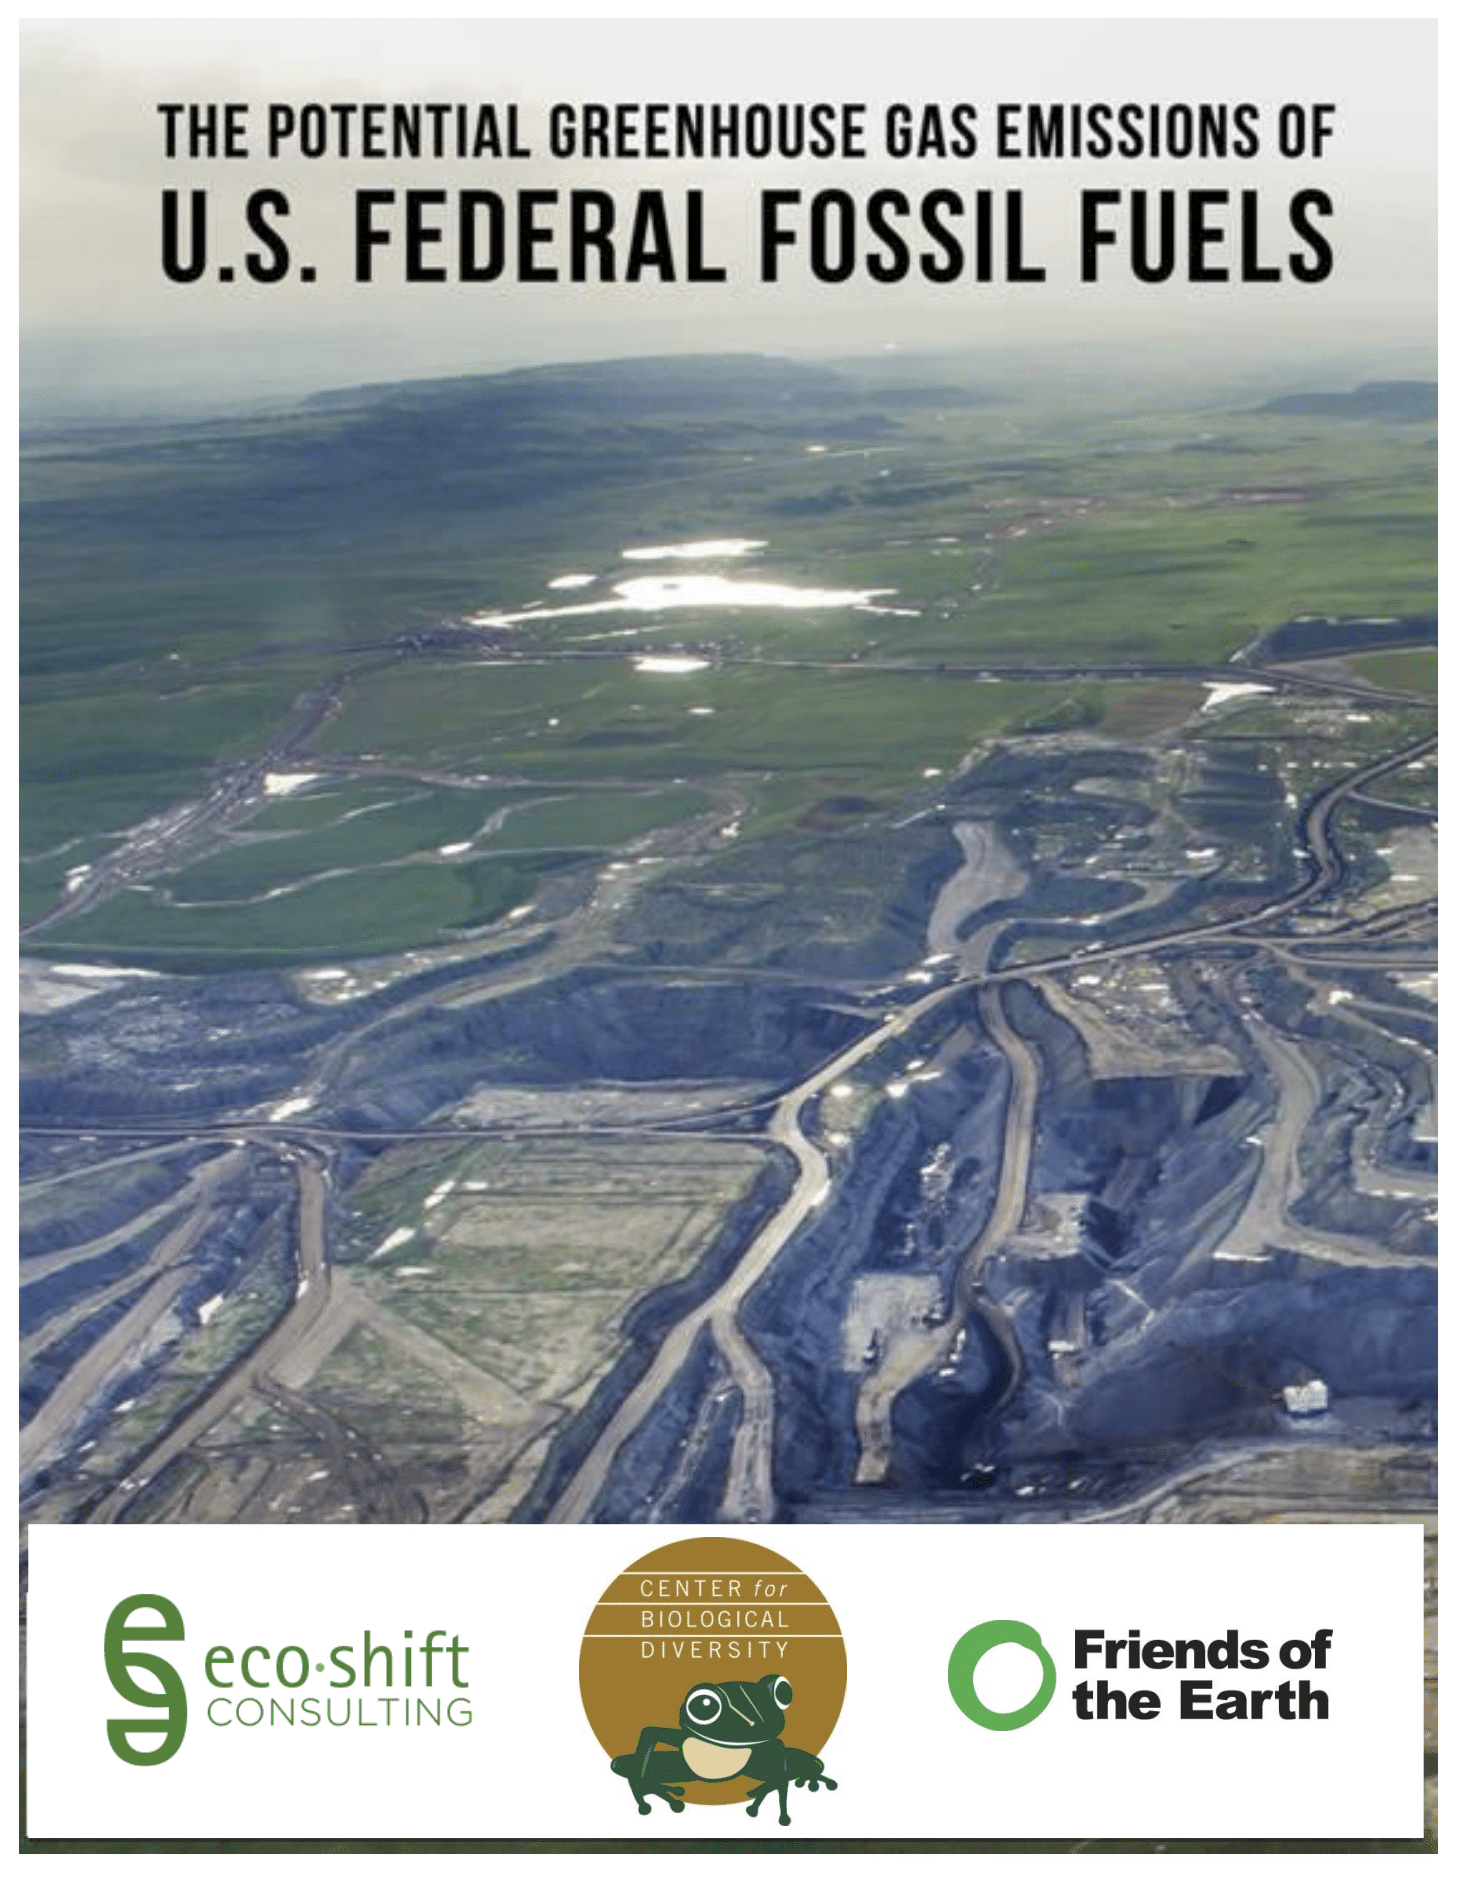 The Potential Greenhouse Gas Emissions of U.S. Federal Fossil Fuels